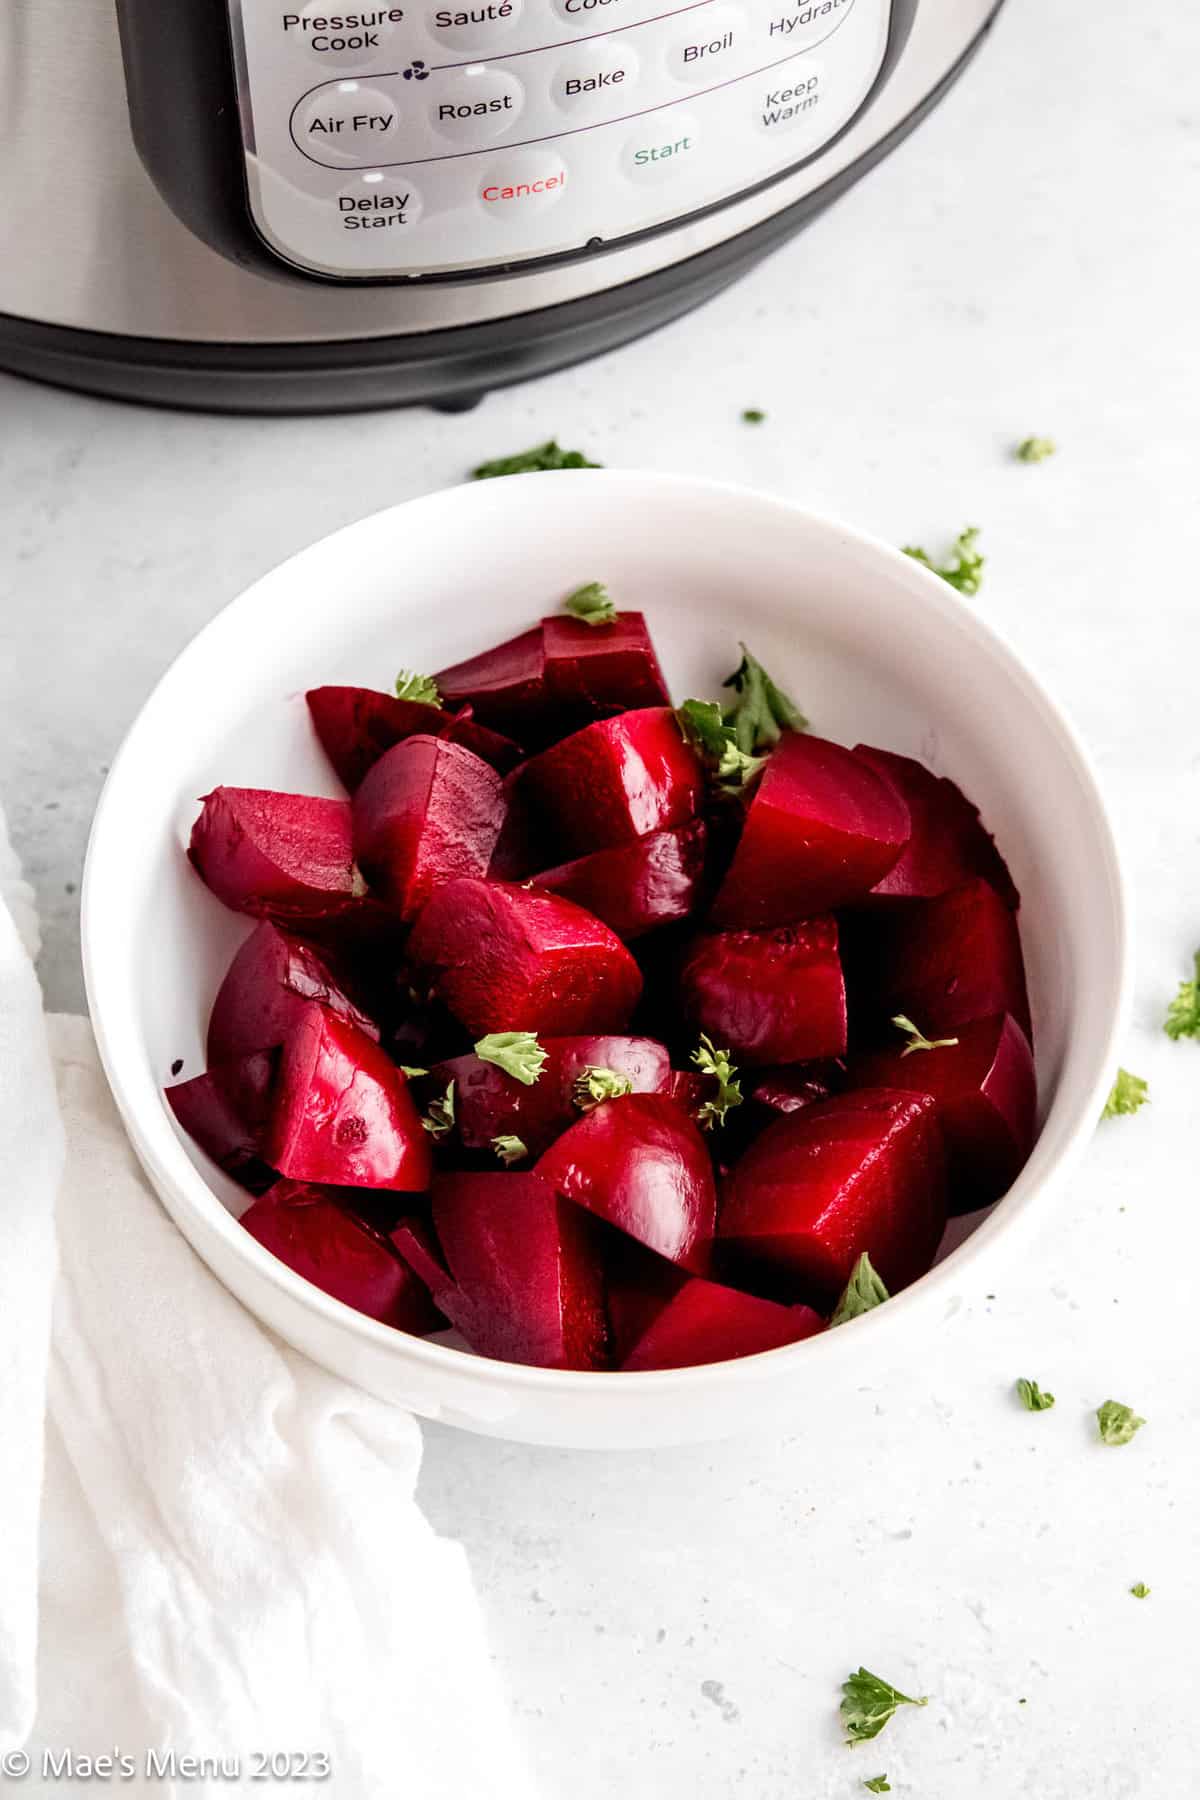 A white bowl of cooked cut up beets with curly parlsey on a white counter.